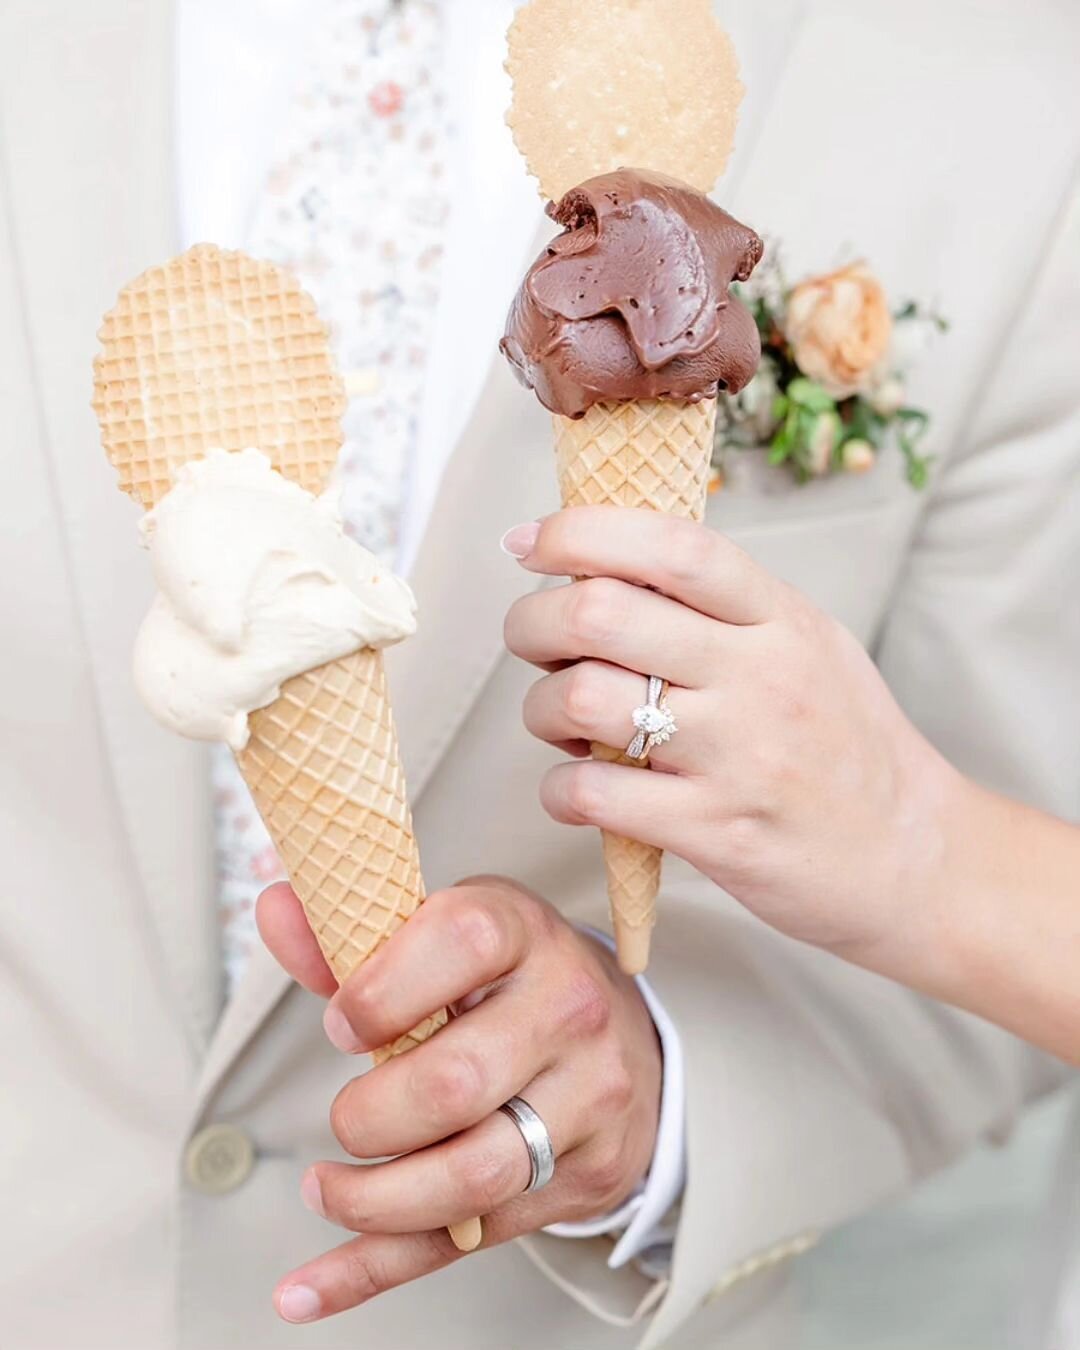 the gelato. the rings. the love. 🥰 
.
.
Cheers to Megan &amp; Bryce! (a few weeks back 😉) And shoutout to @lainyjean_photography for capturing these extra sweet moments with perfection! ✨
.
.
p.s. 2024 wedding booking is open &amp; weekend dates ar